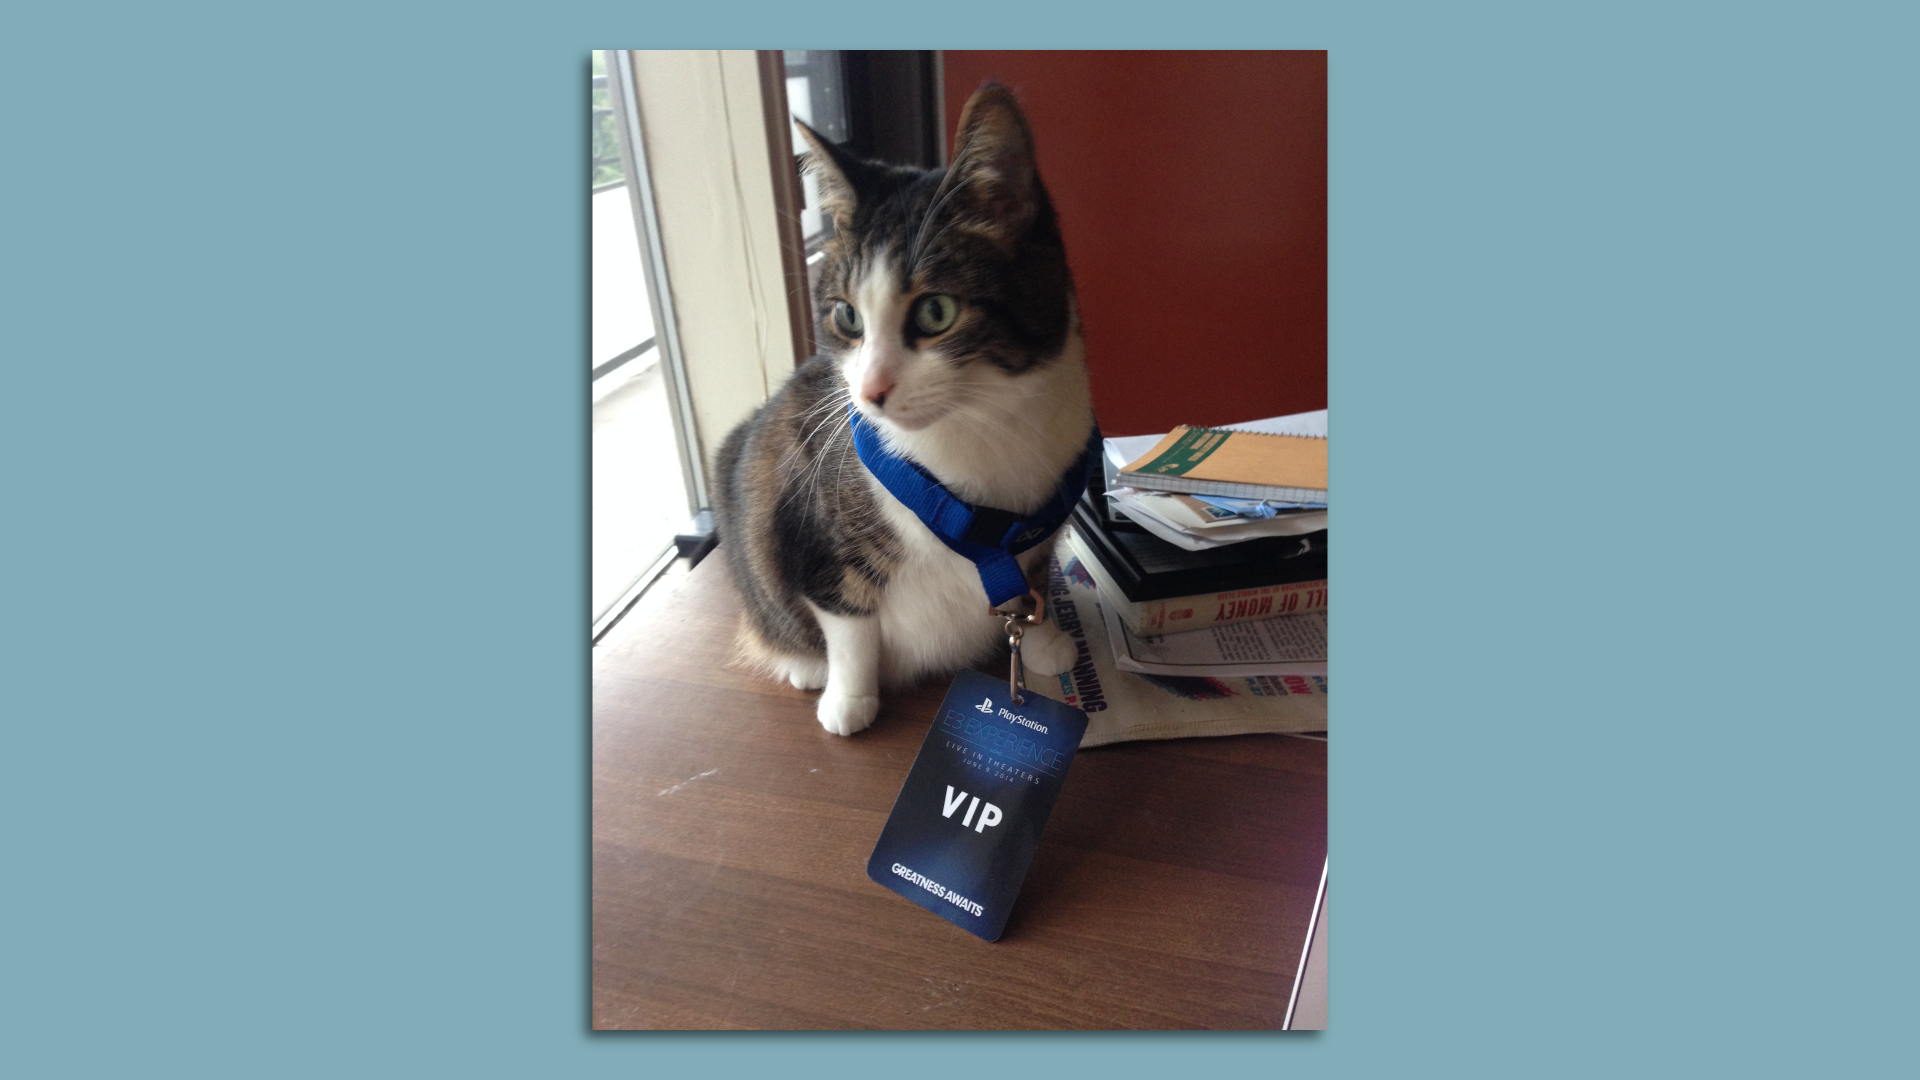 Picture of a cat named Ella wearing a lanyard that says "VIP."